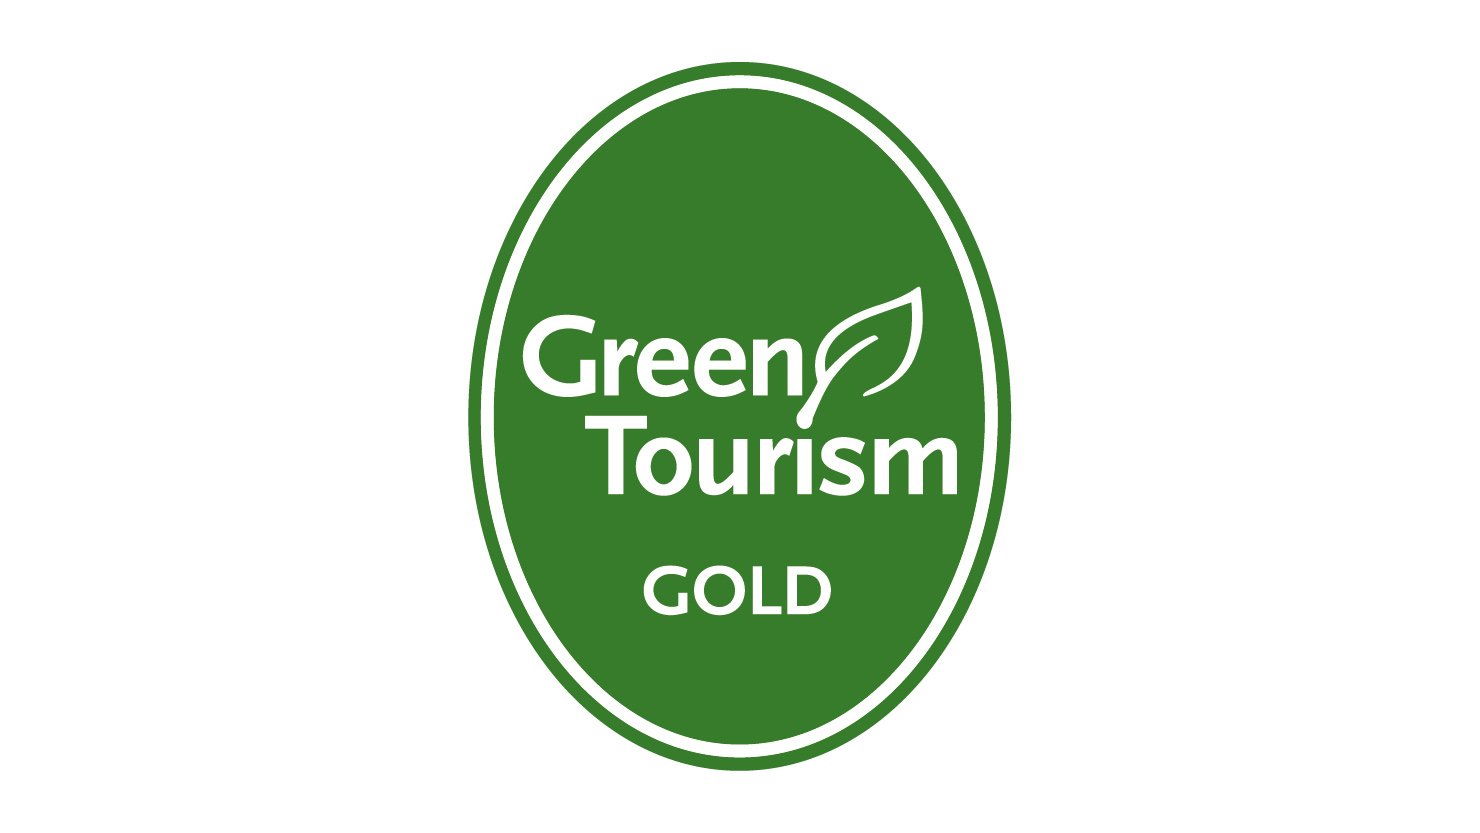 We've been accredited Green Tourism gold!